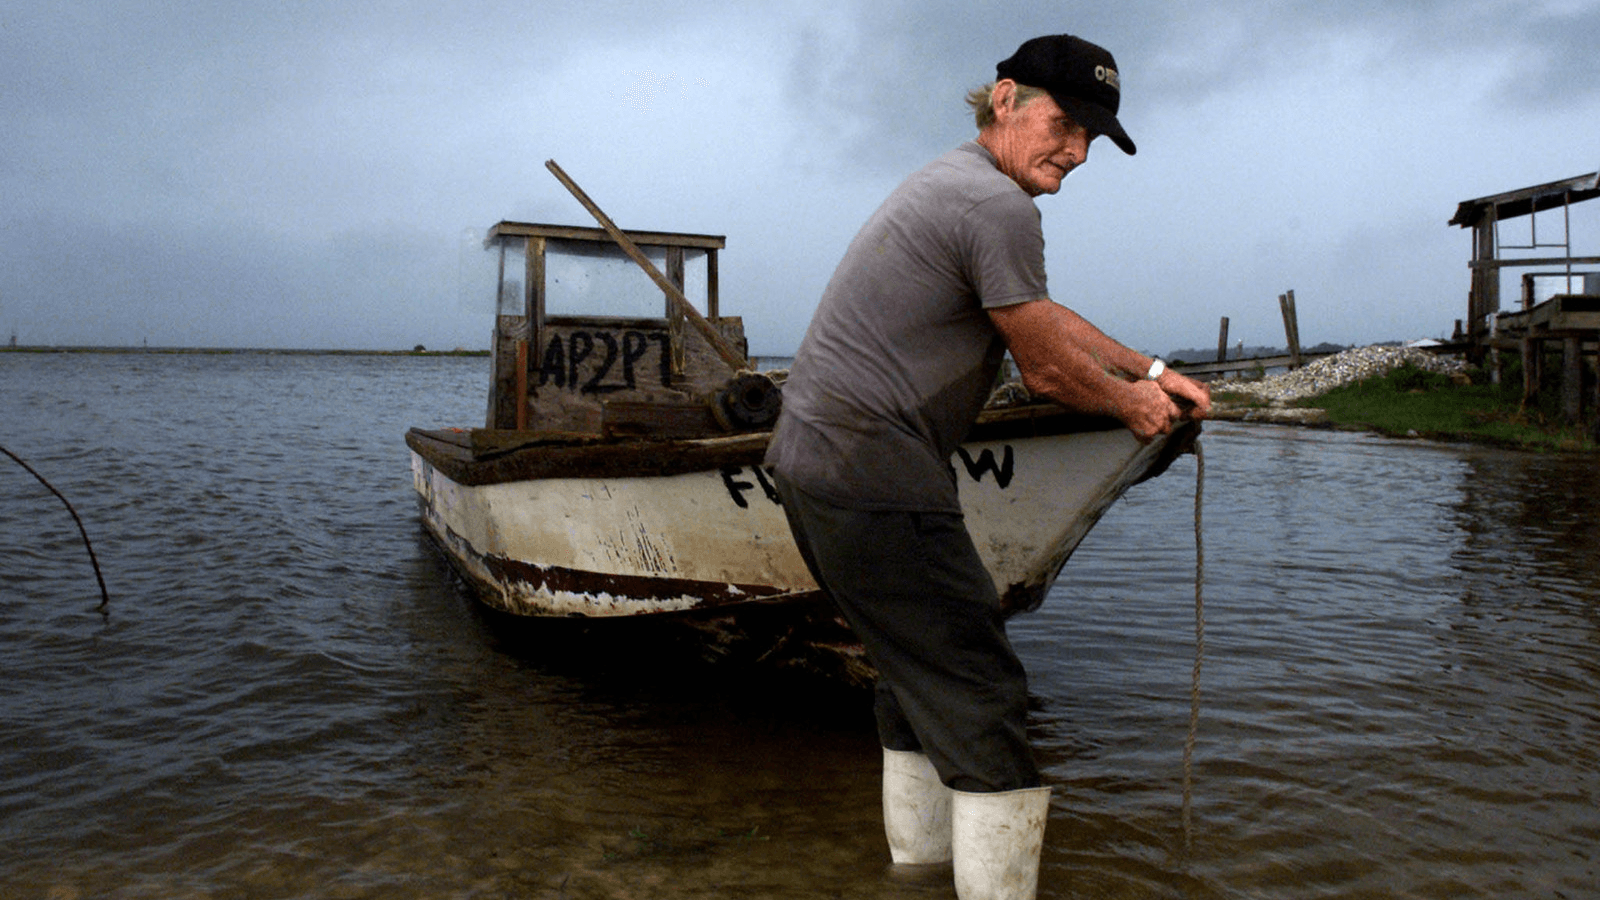 Commercial oyster fisherman Charles King prepairs to pull his aging oyster boat from the rich oystering waters of Apalachicola Bay.